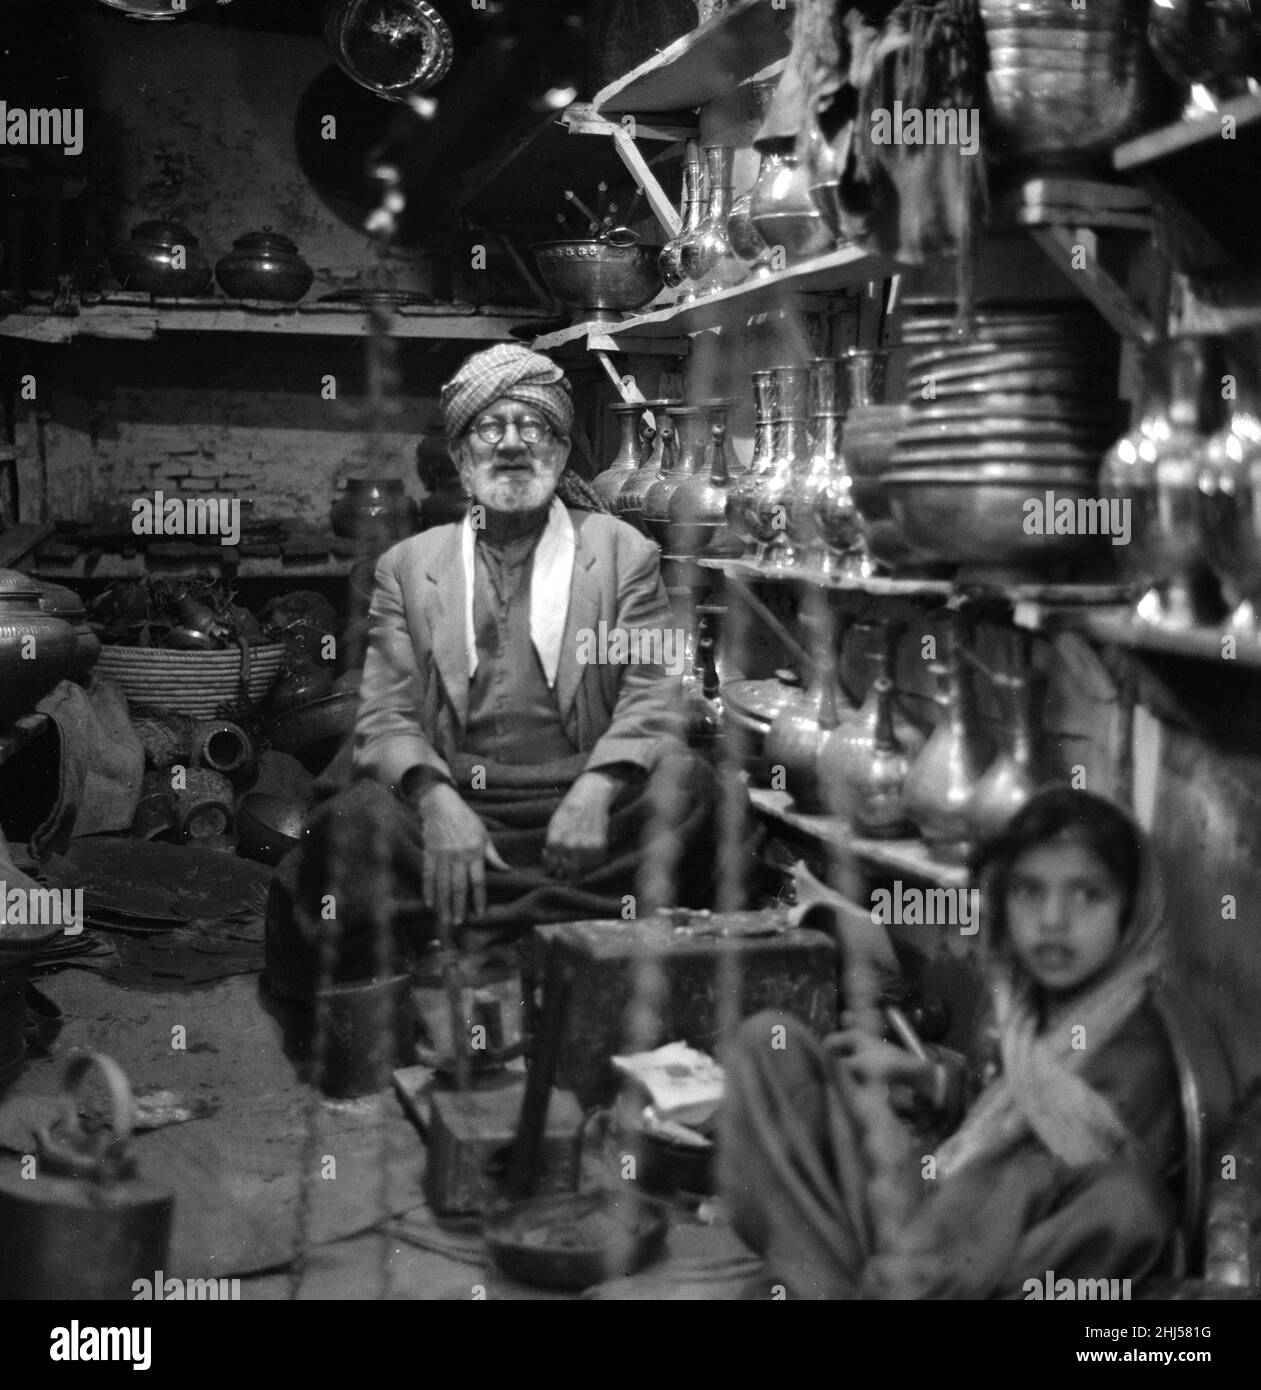 Traders sit inside their shop in Peshawar amongst the pots and pans. Pesthe capital of the North West Frontier province of Pakistan. February 1961  l Stock Photo